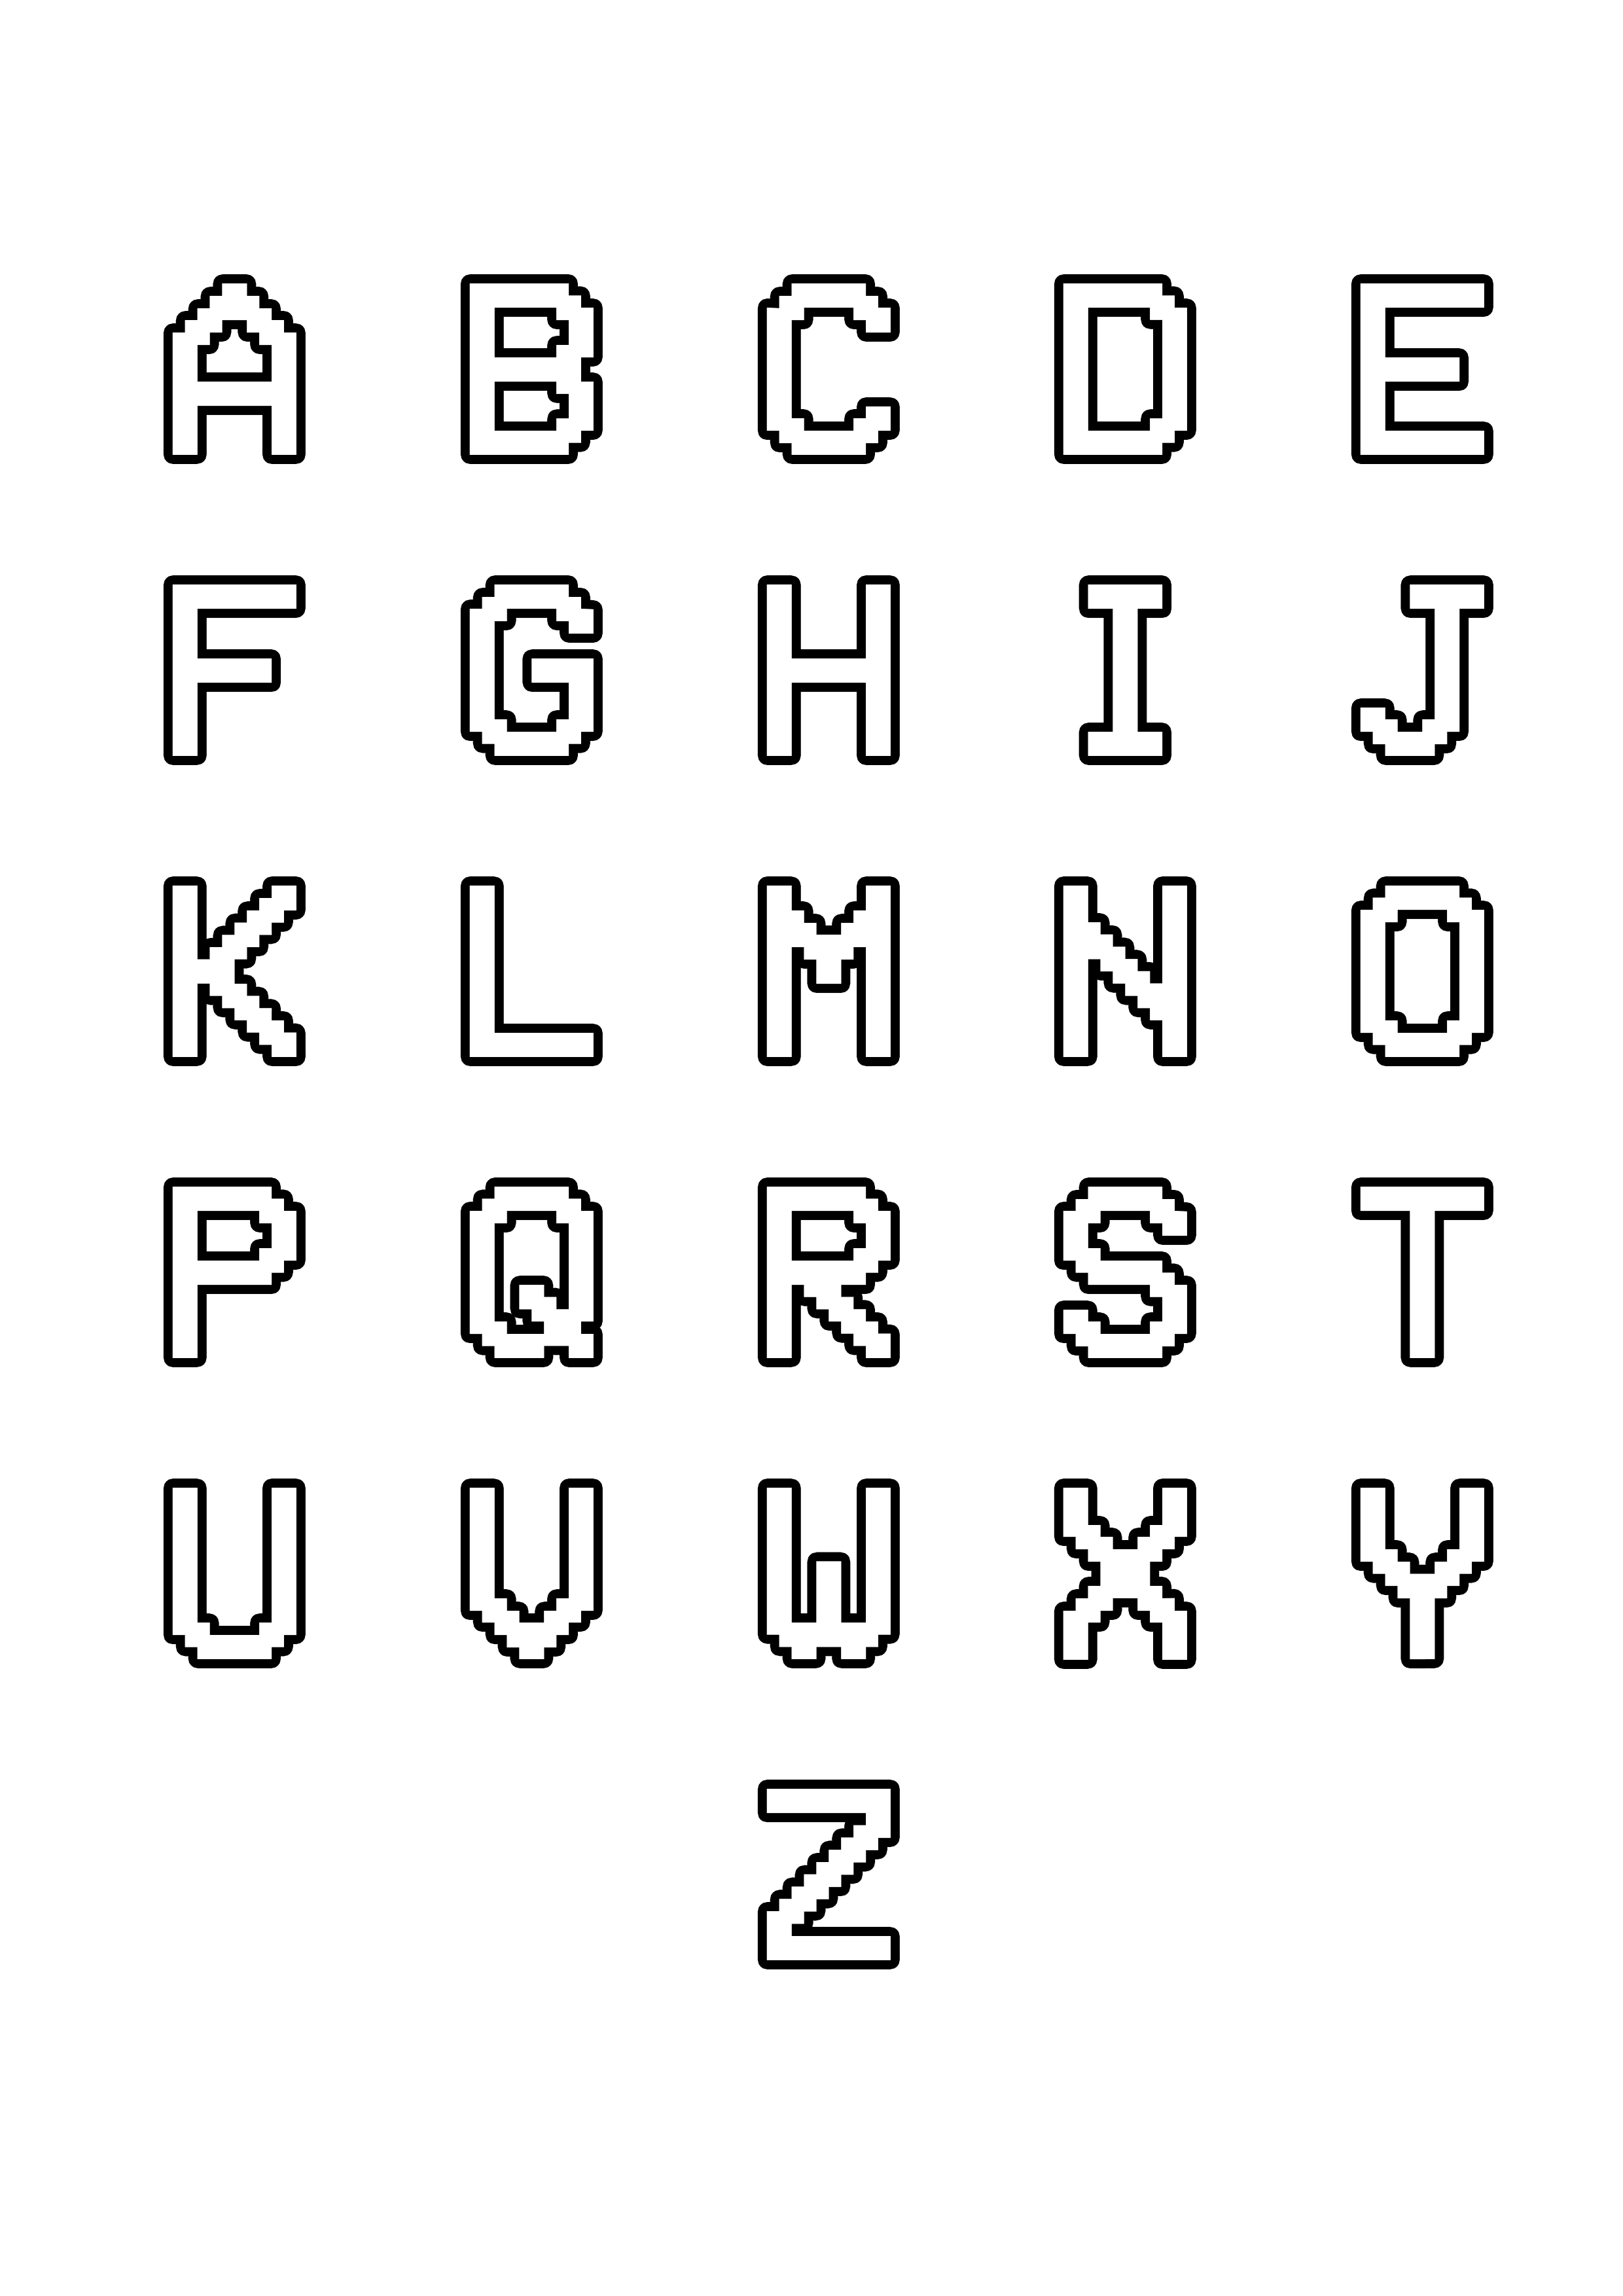 Simple Alphabet coloring page to download for free : From A to Z (90's computer style)